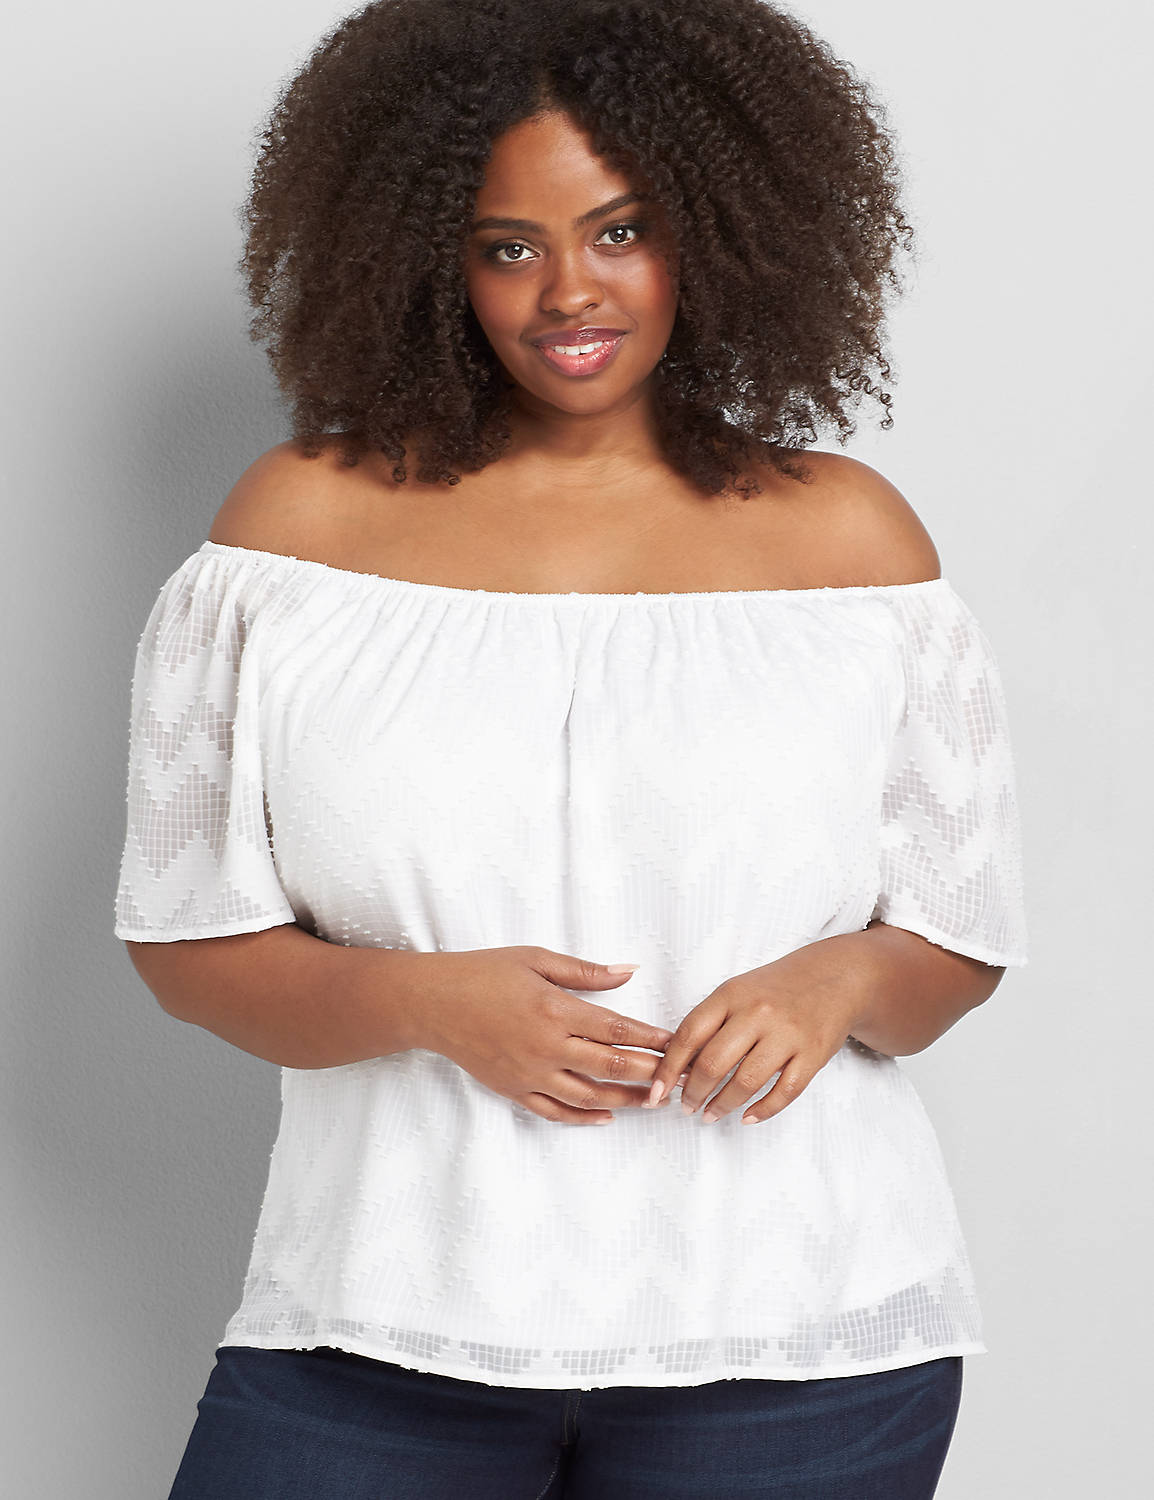 Textured  Off-The-Shoulder Top Product Image 1